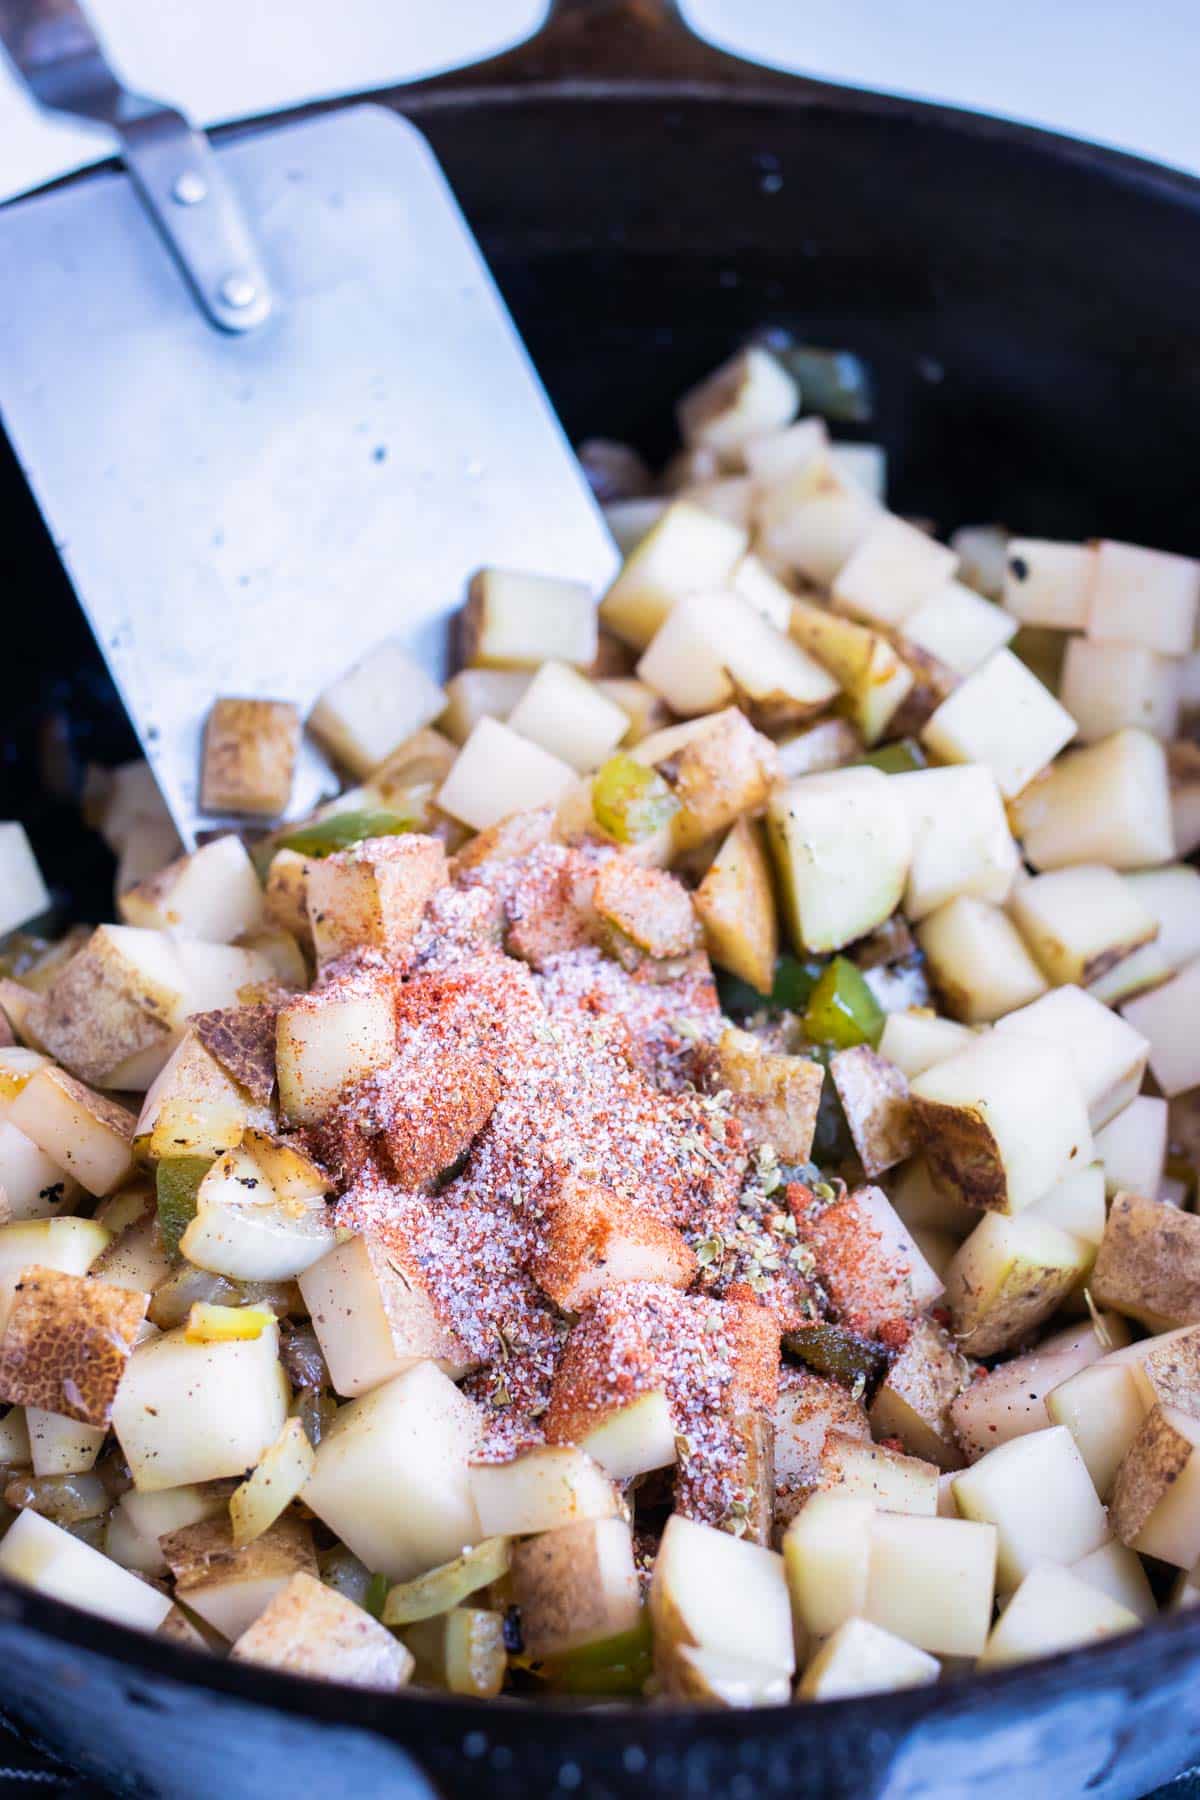 Potatoes and veggies are cooked together in one pot.